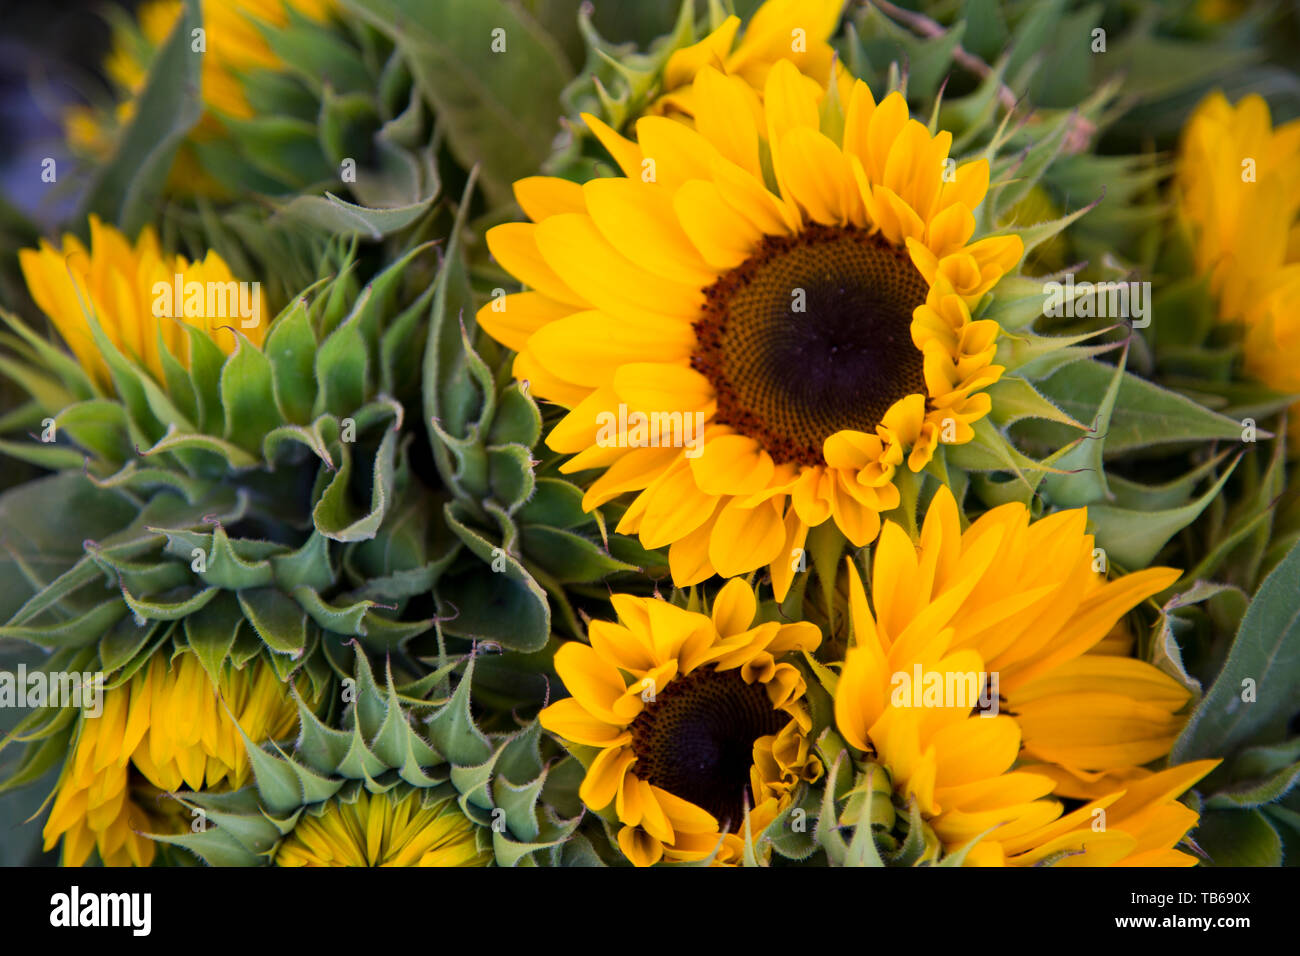 Closeup of sunflower bouquet in French flower market. Stock Photo